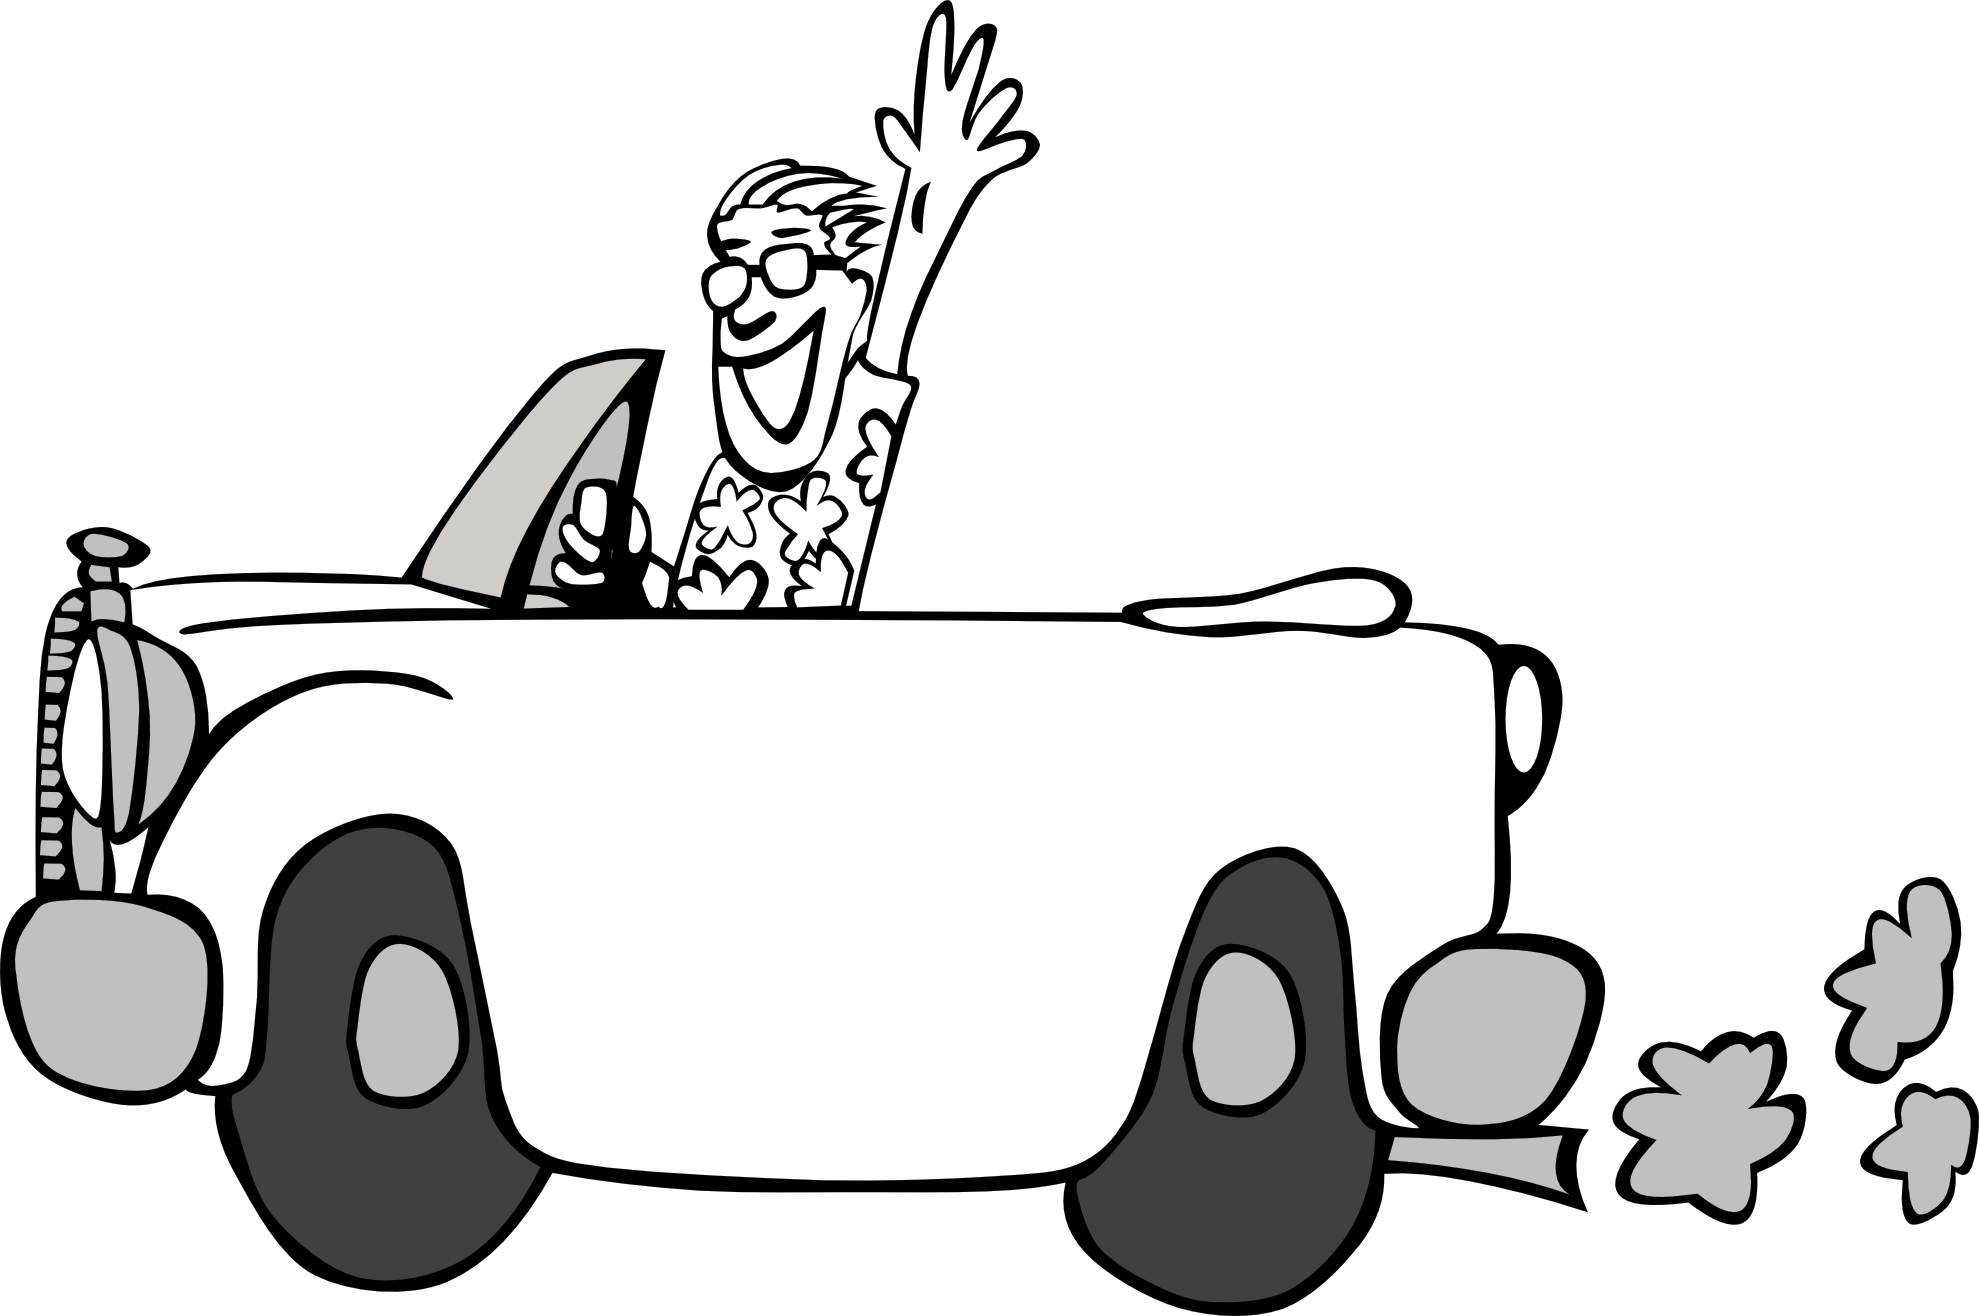 free black and white clipart of cars - photo #23